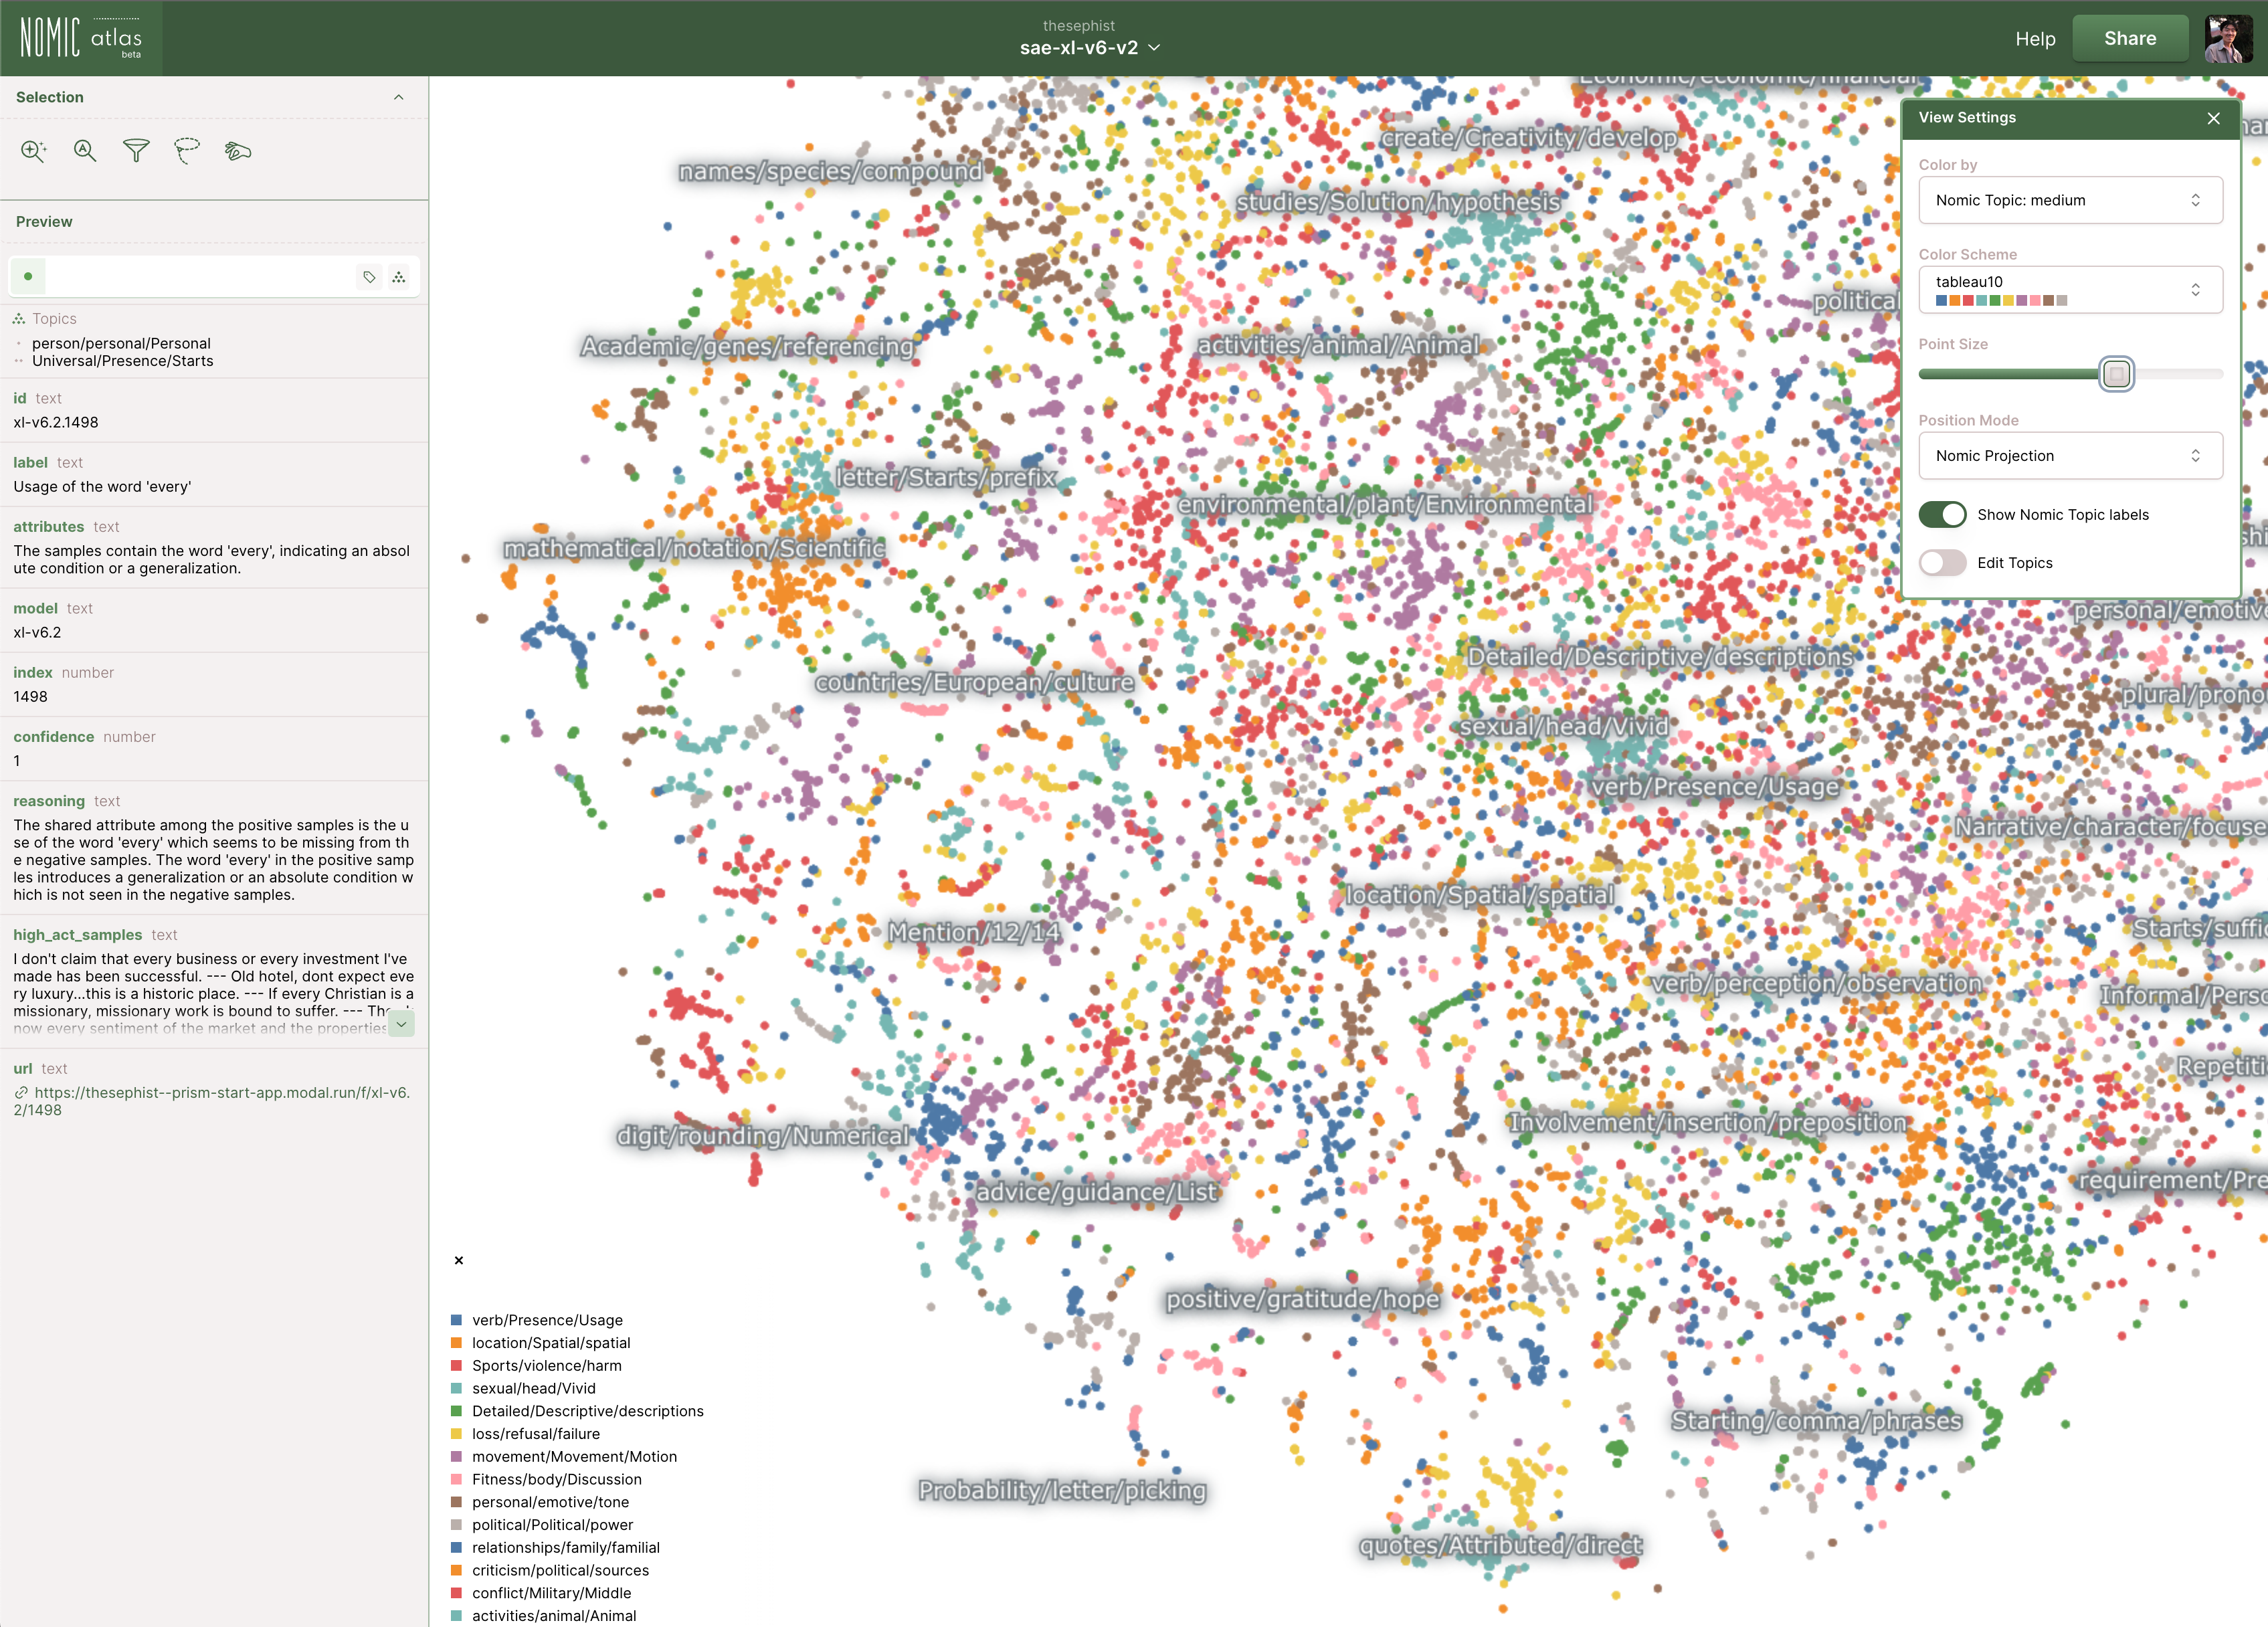 Screenshot of the Nomic Atlas map of features from the lg-v6 SAE. The main area displays a colorful scatter plot with thousands of dots representing different feature directions, clustered and labeled. The left sidebar contains details about a selected data point, while the right sidebar shows view settings. The interface includes various tools for interacting with the data.